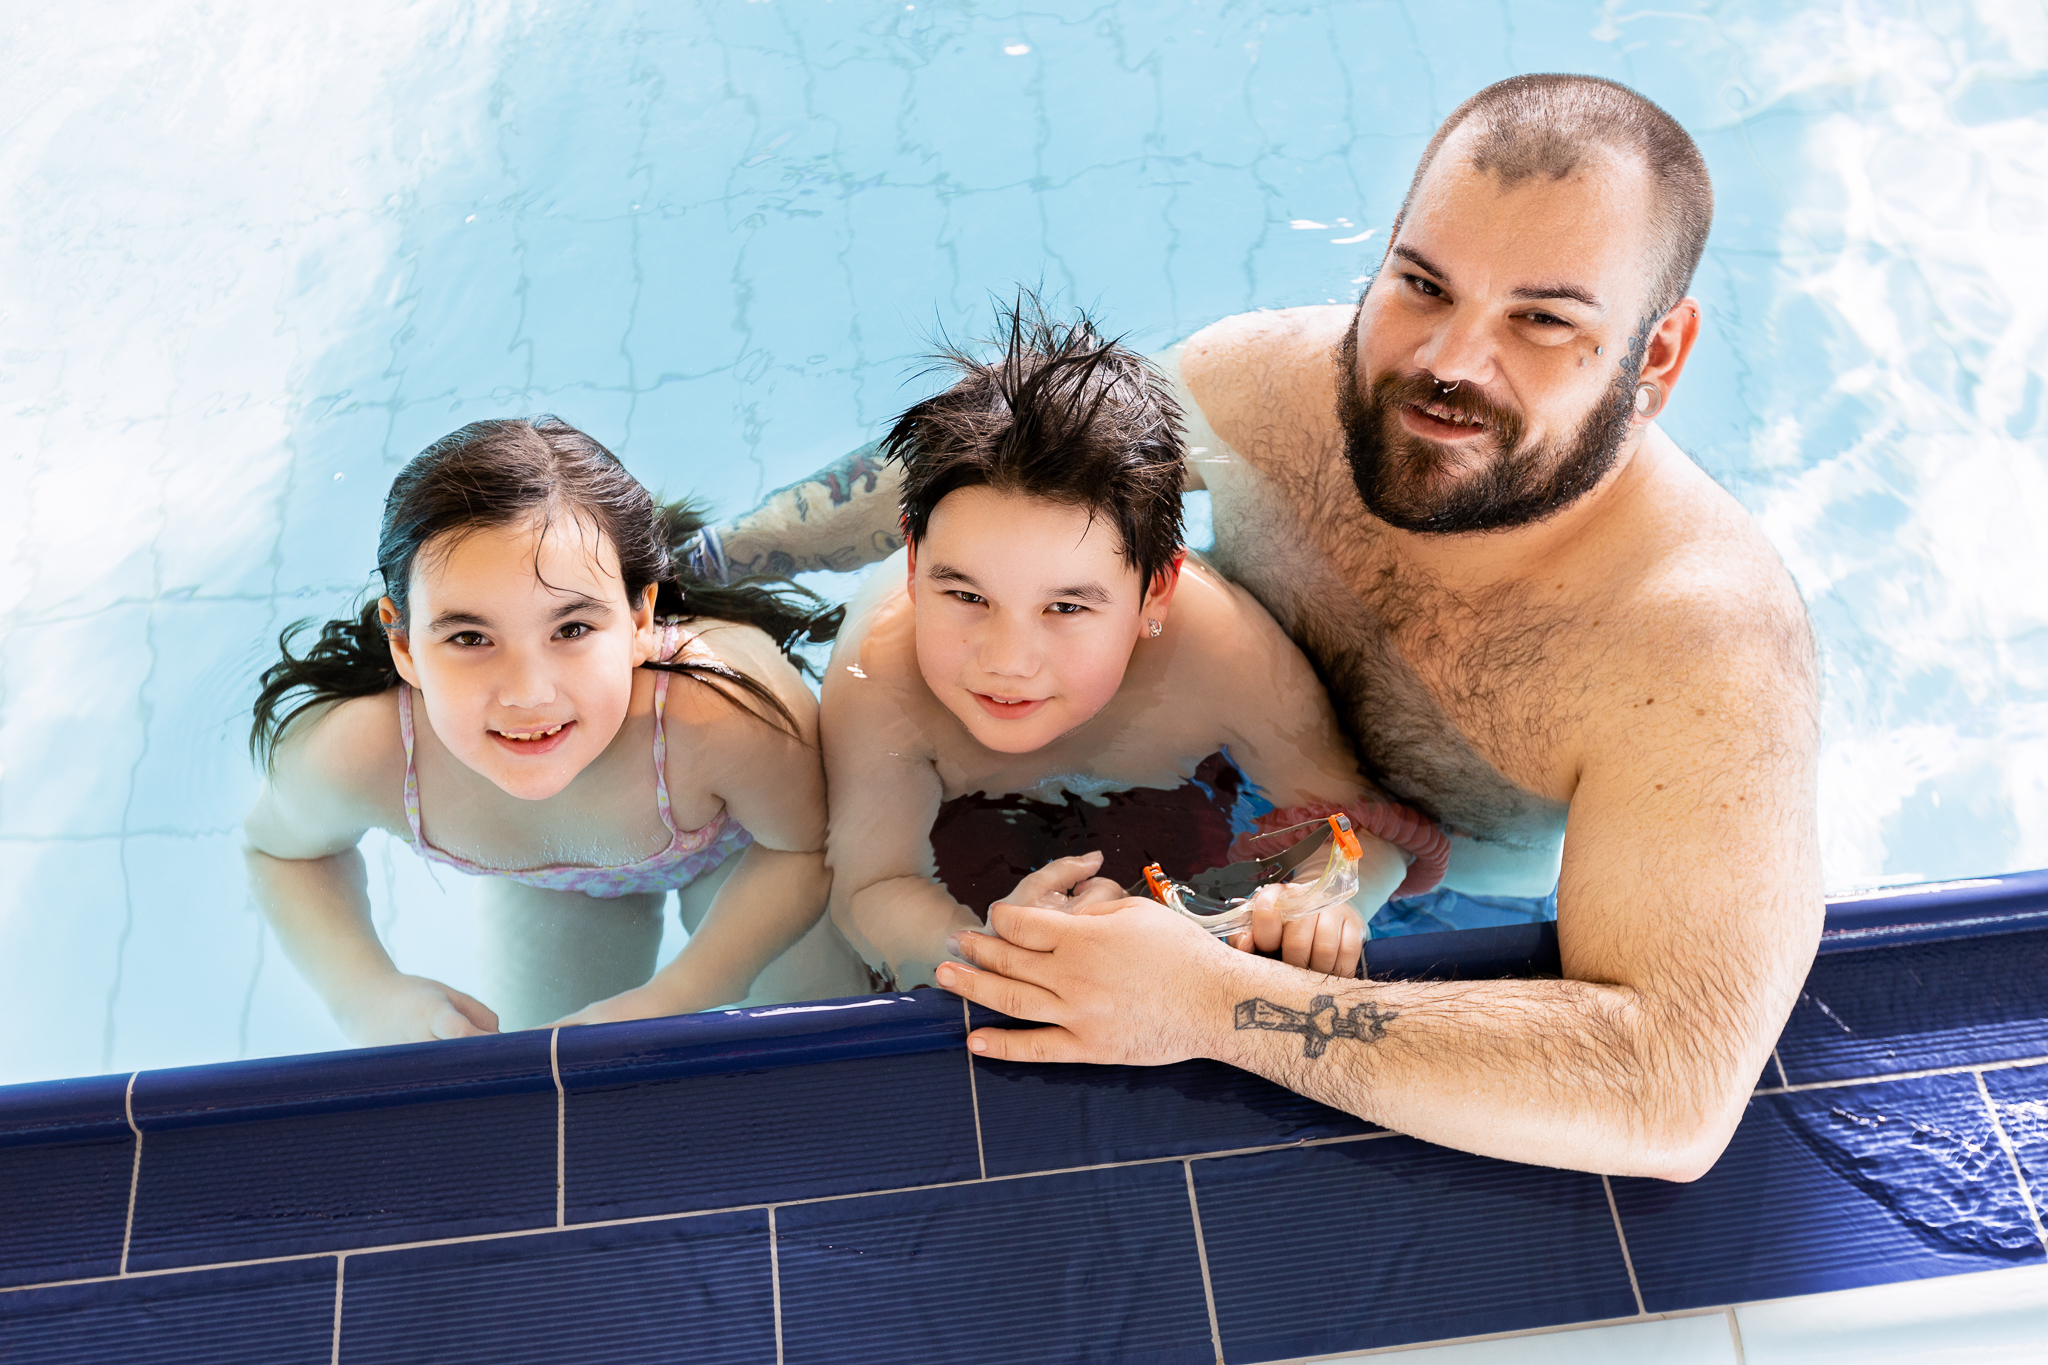 two children and a man smile for a photo in a pool